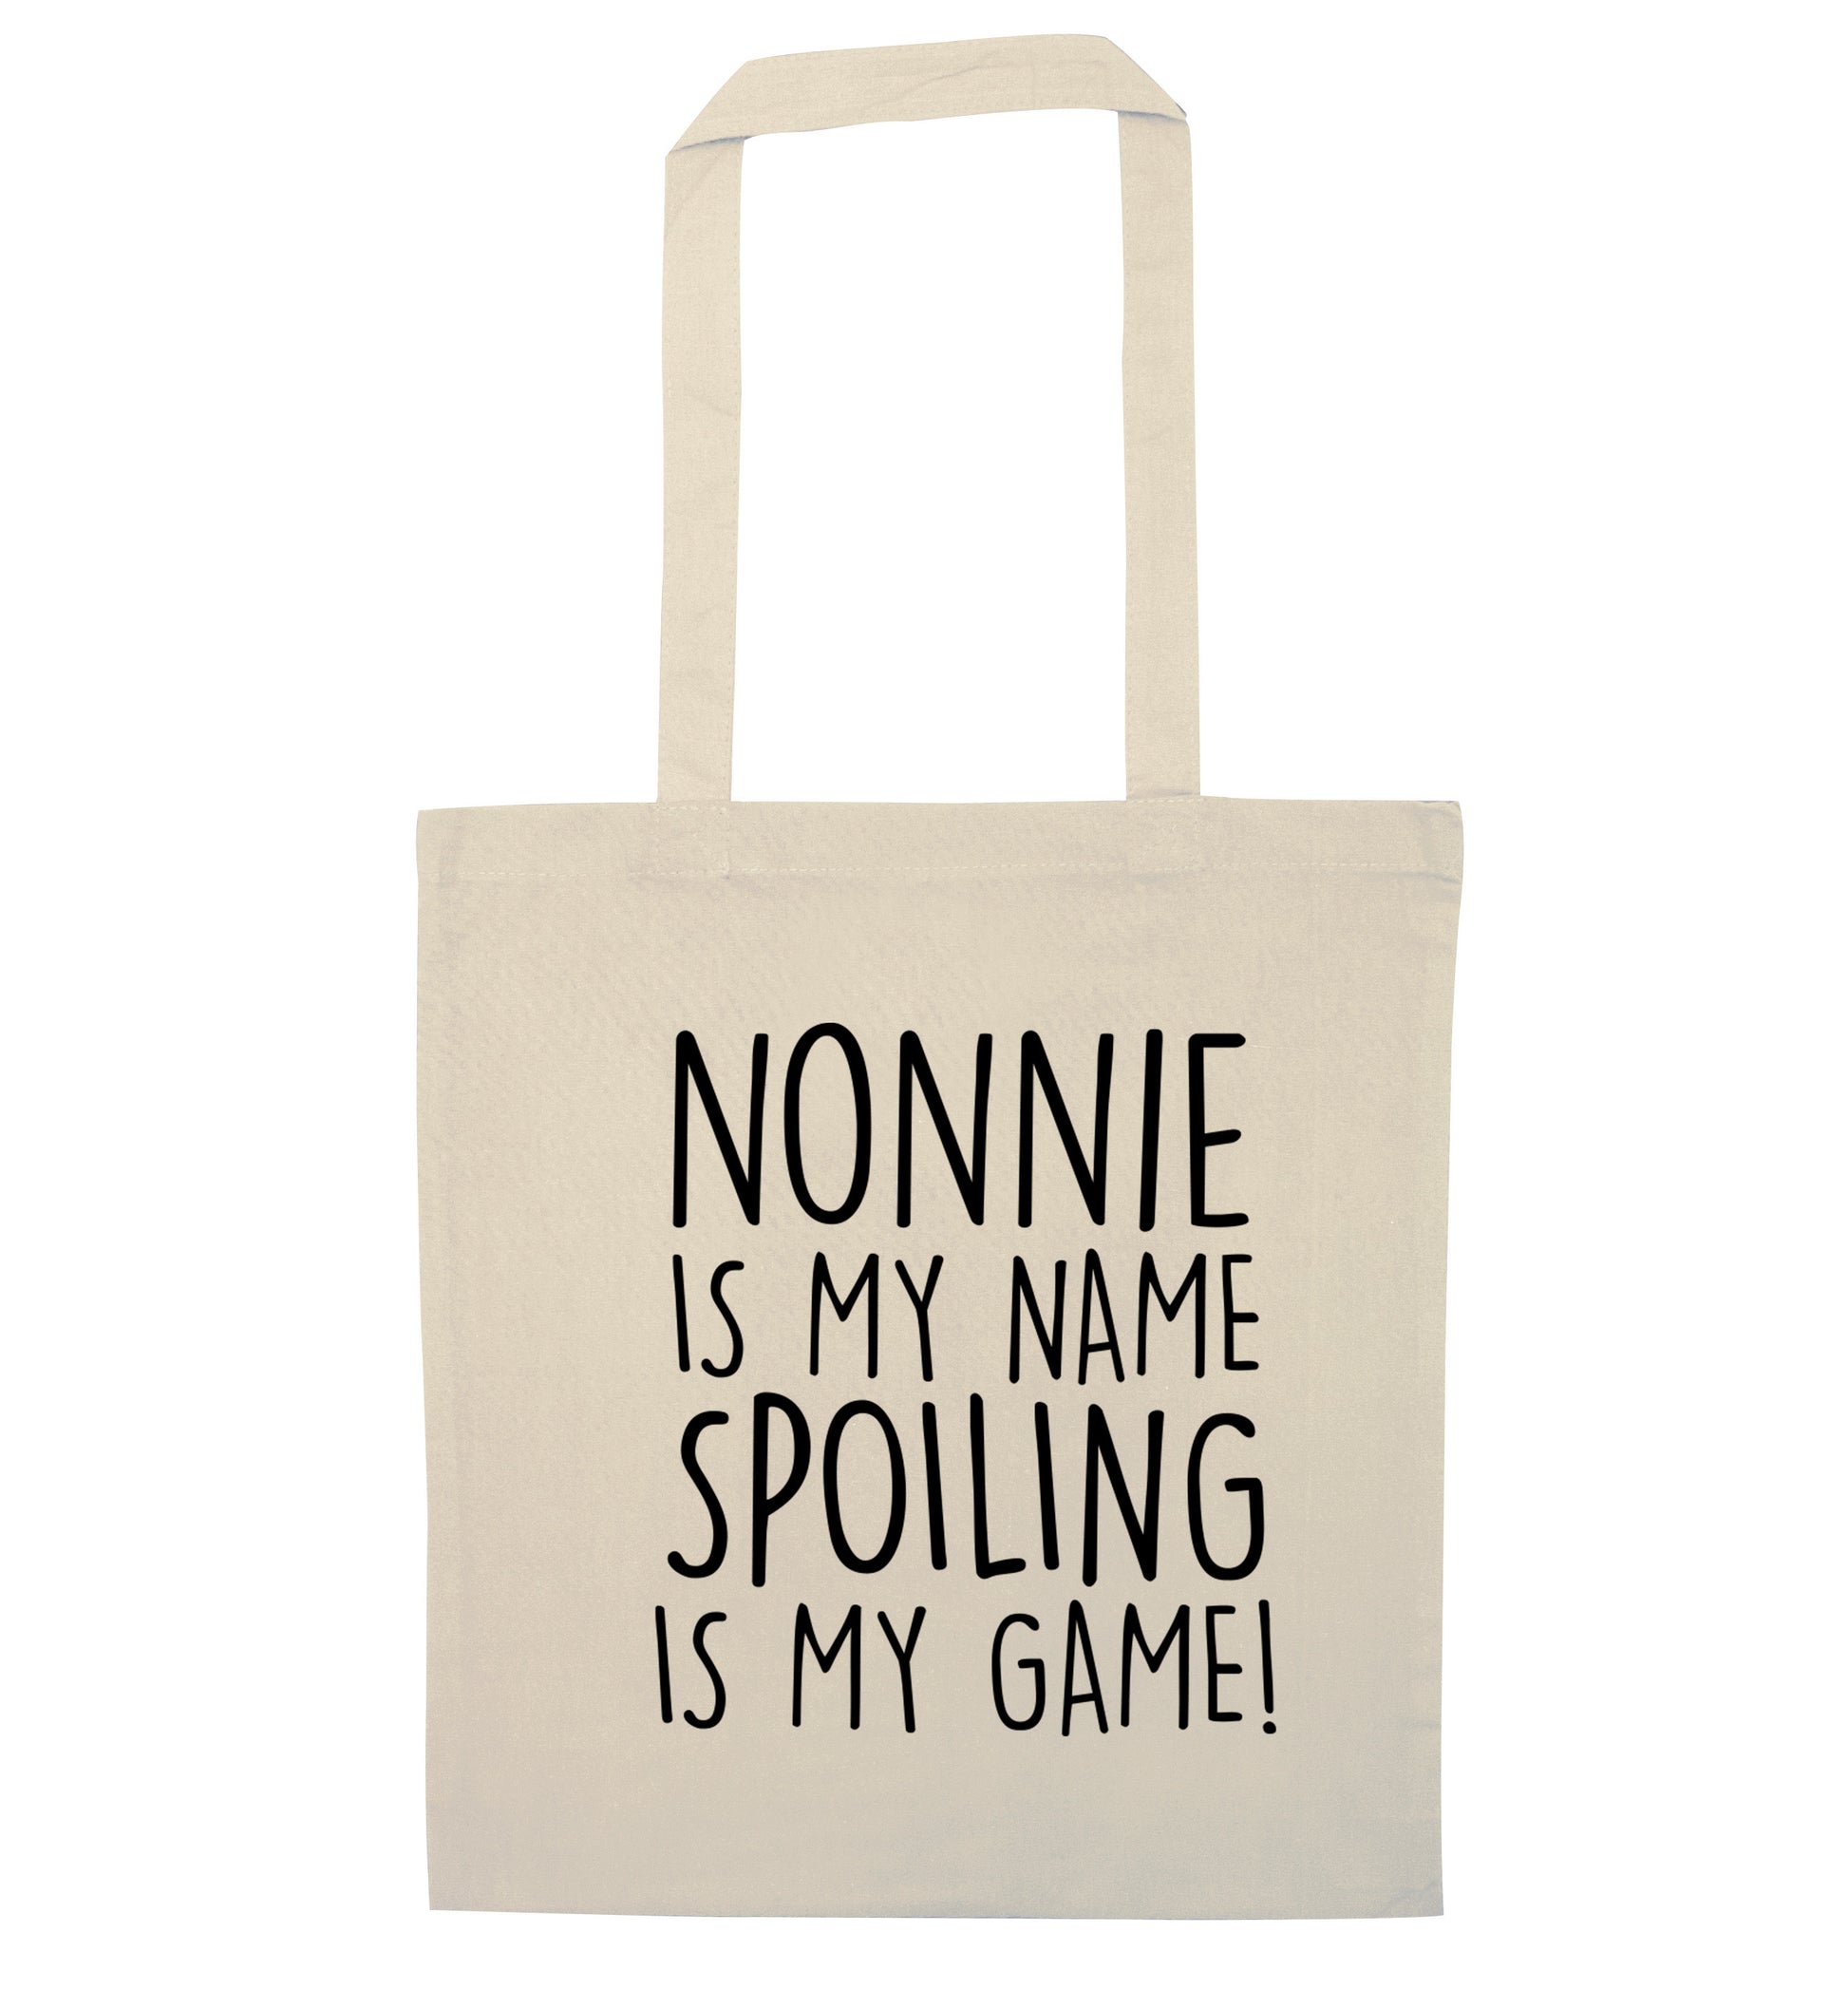 Nonnie is my name, spoiling is my game natural tote bag